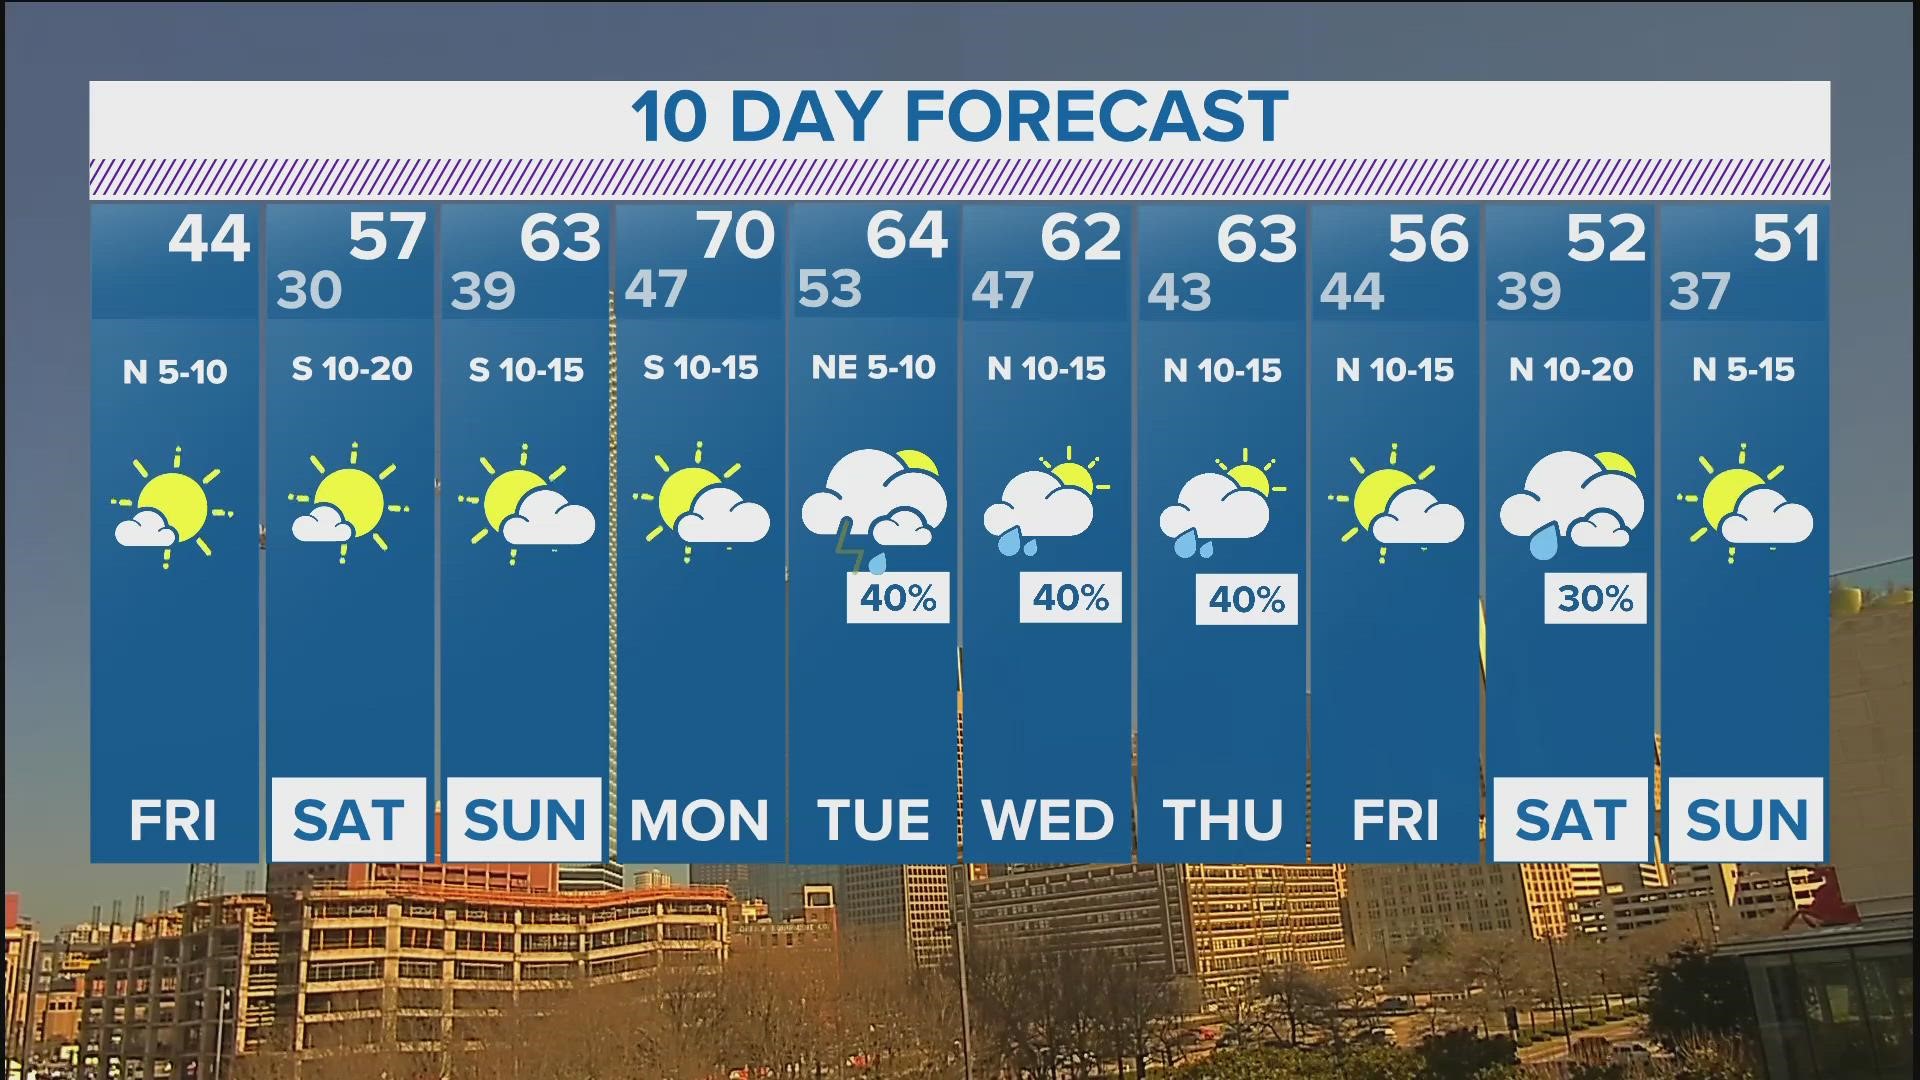 A warm-up of 70s will come early next week!